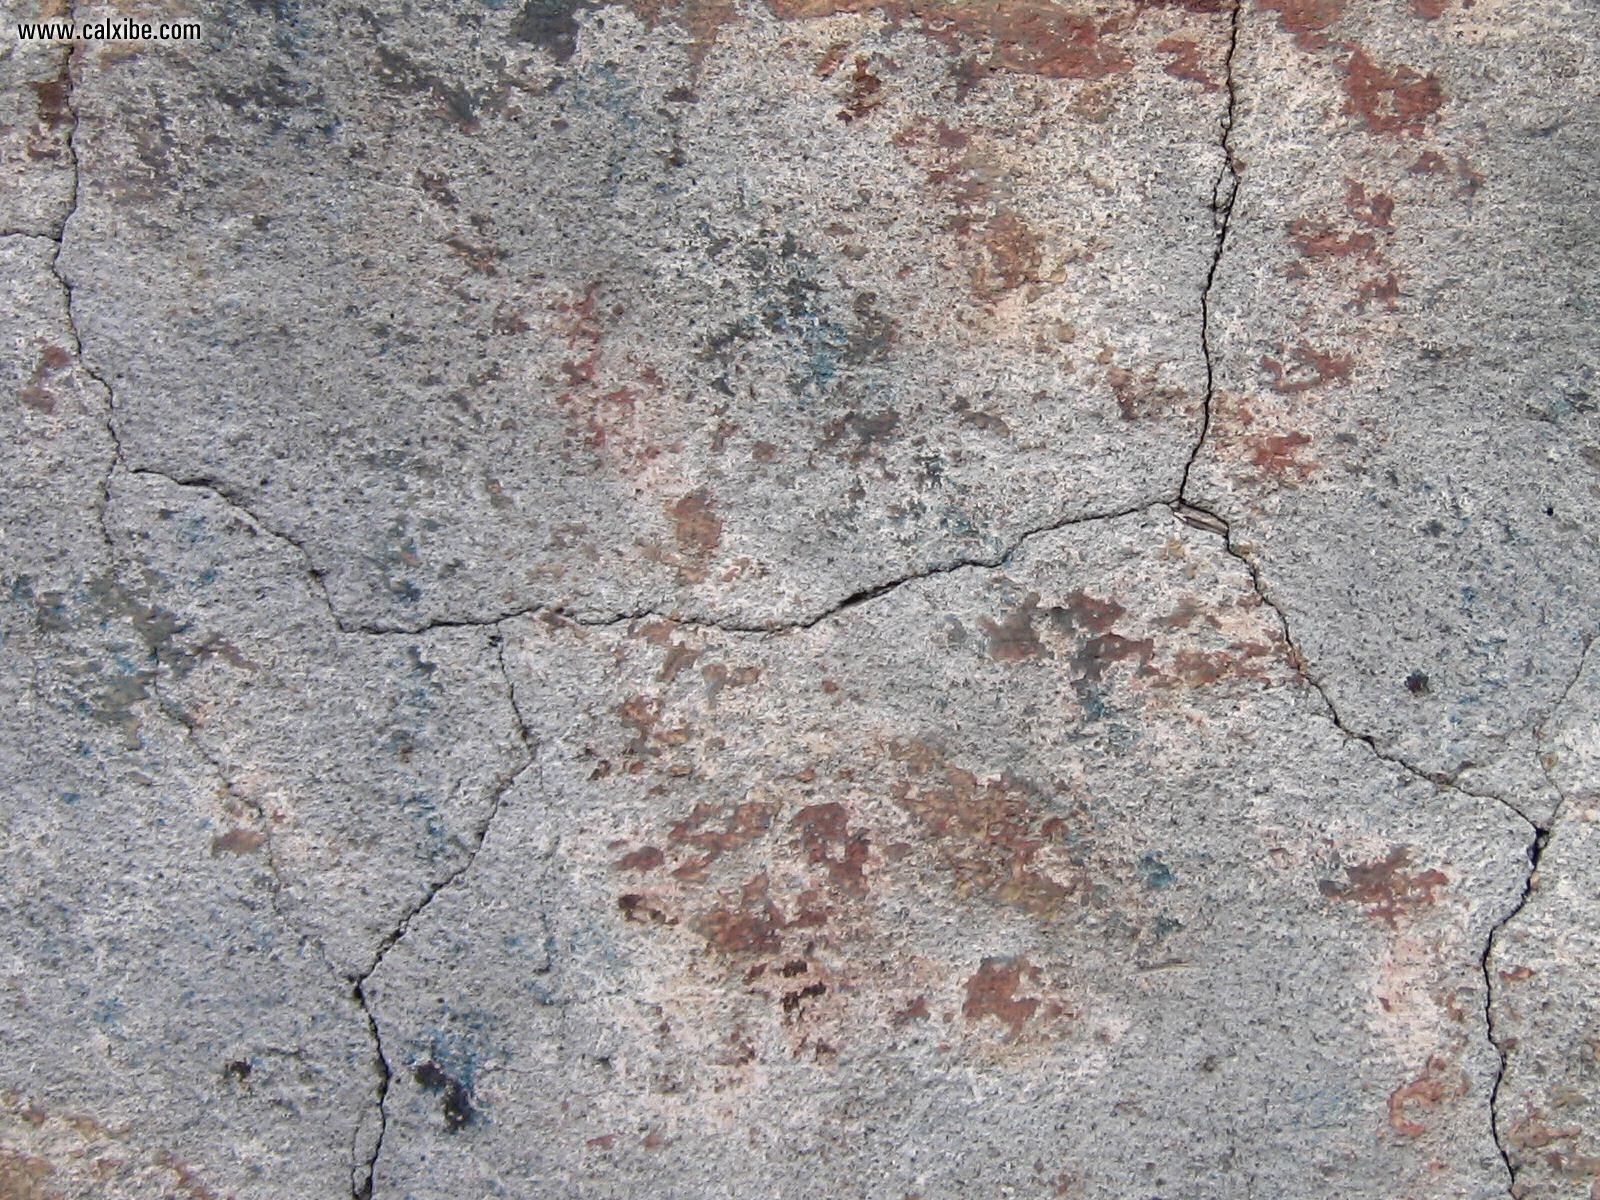 Development: Urban Cracked Wall S, picture nr. 10957